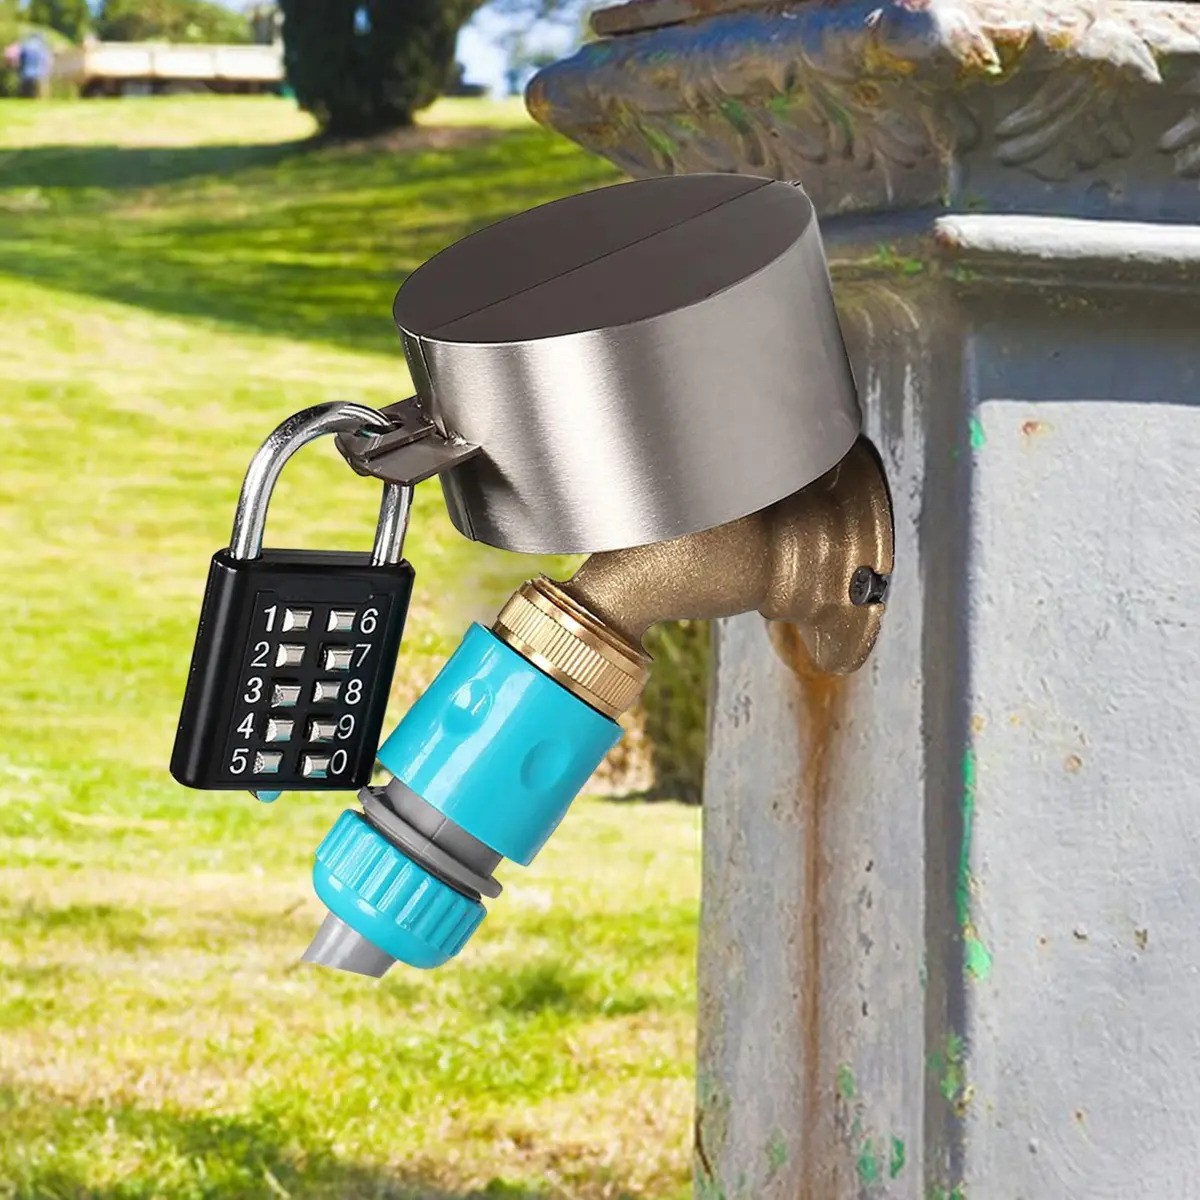 How To Childproof An Outdoor Faucet